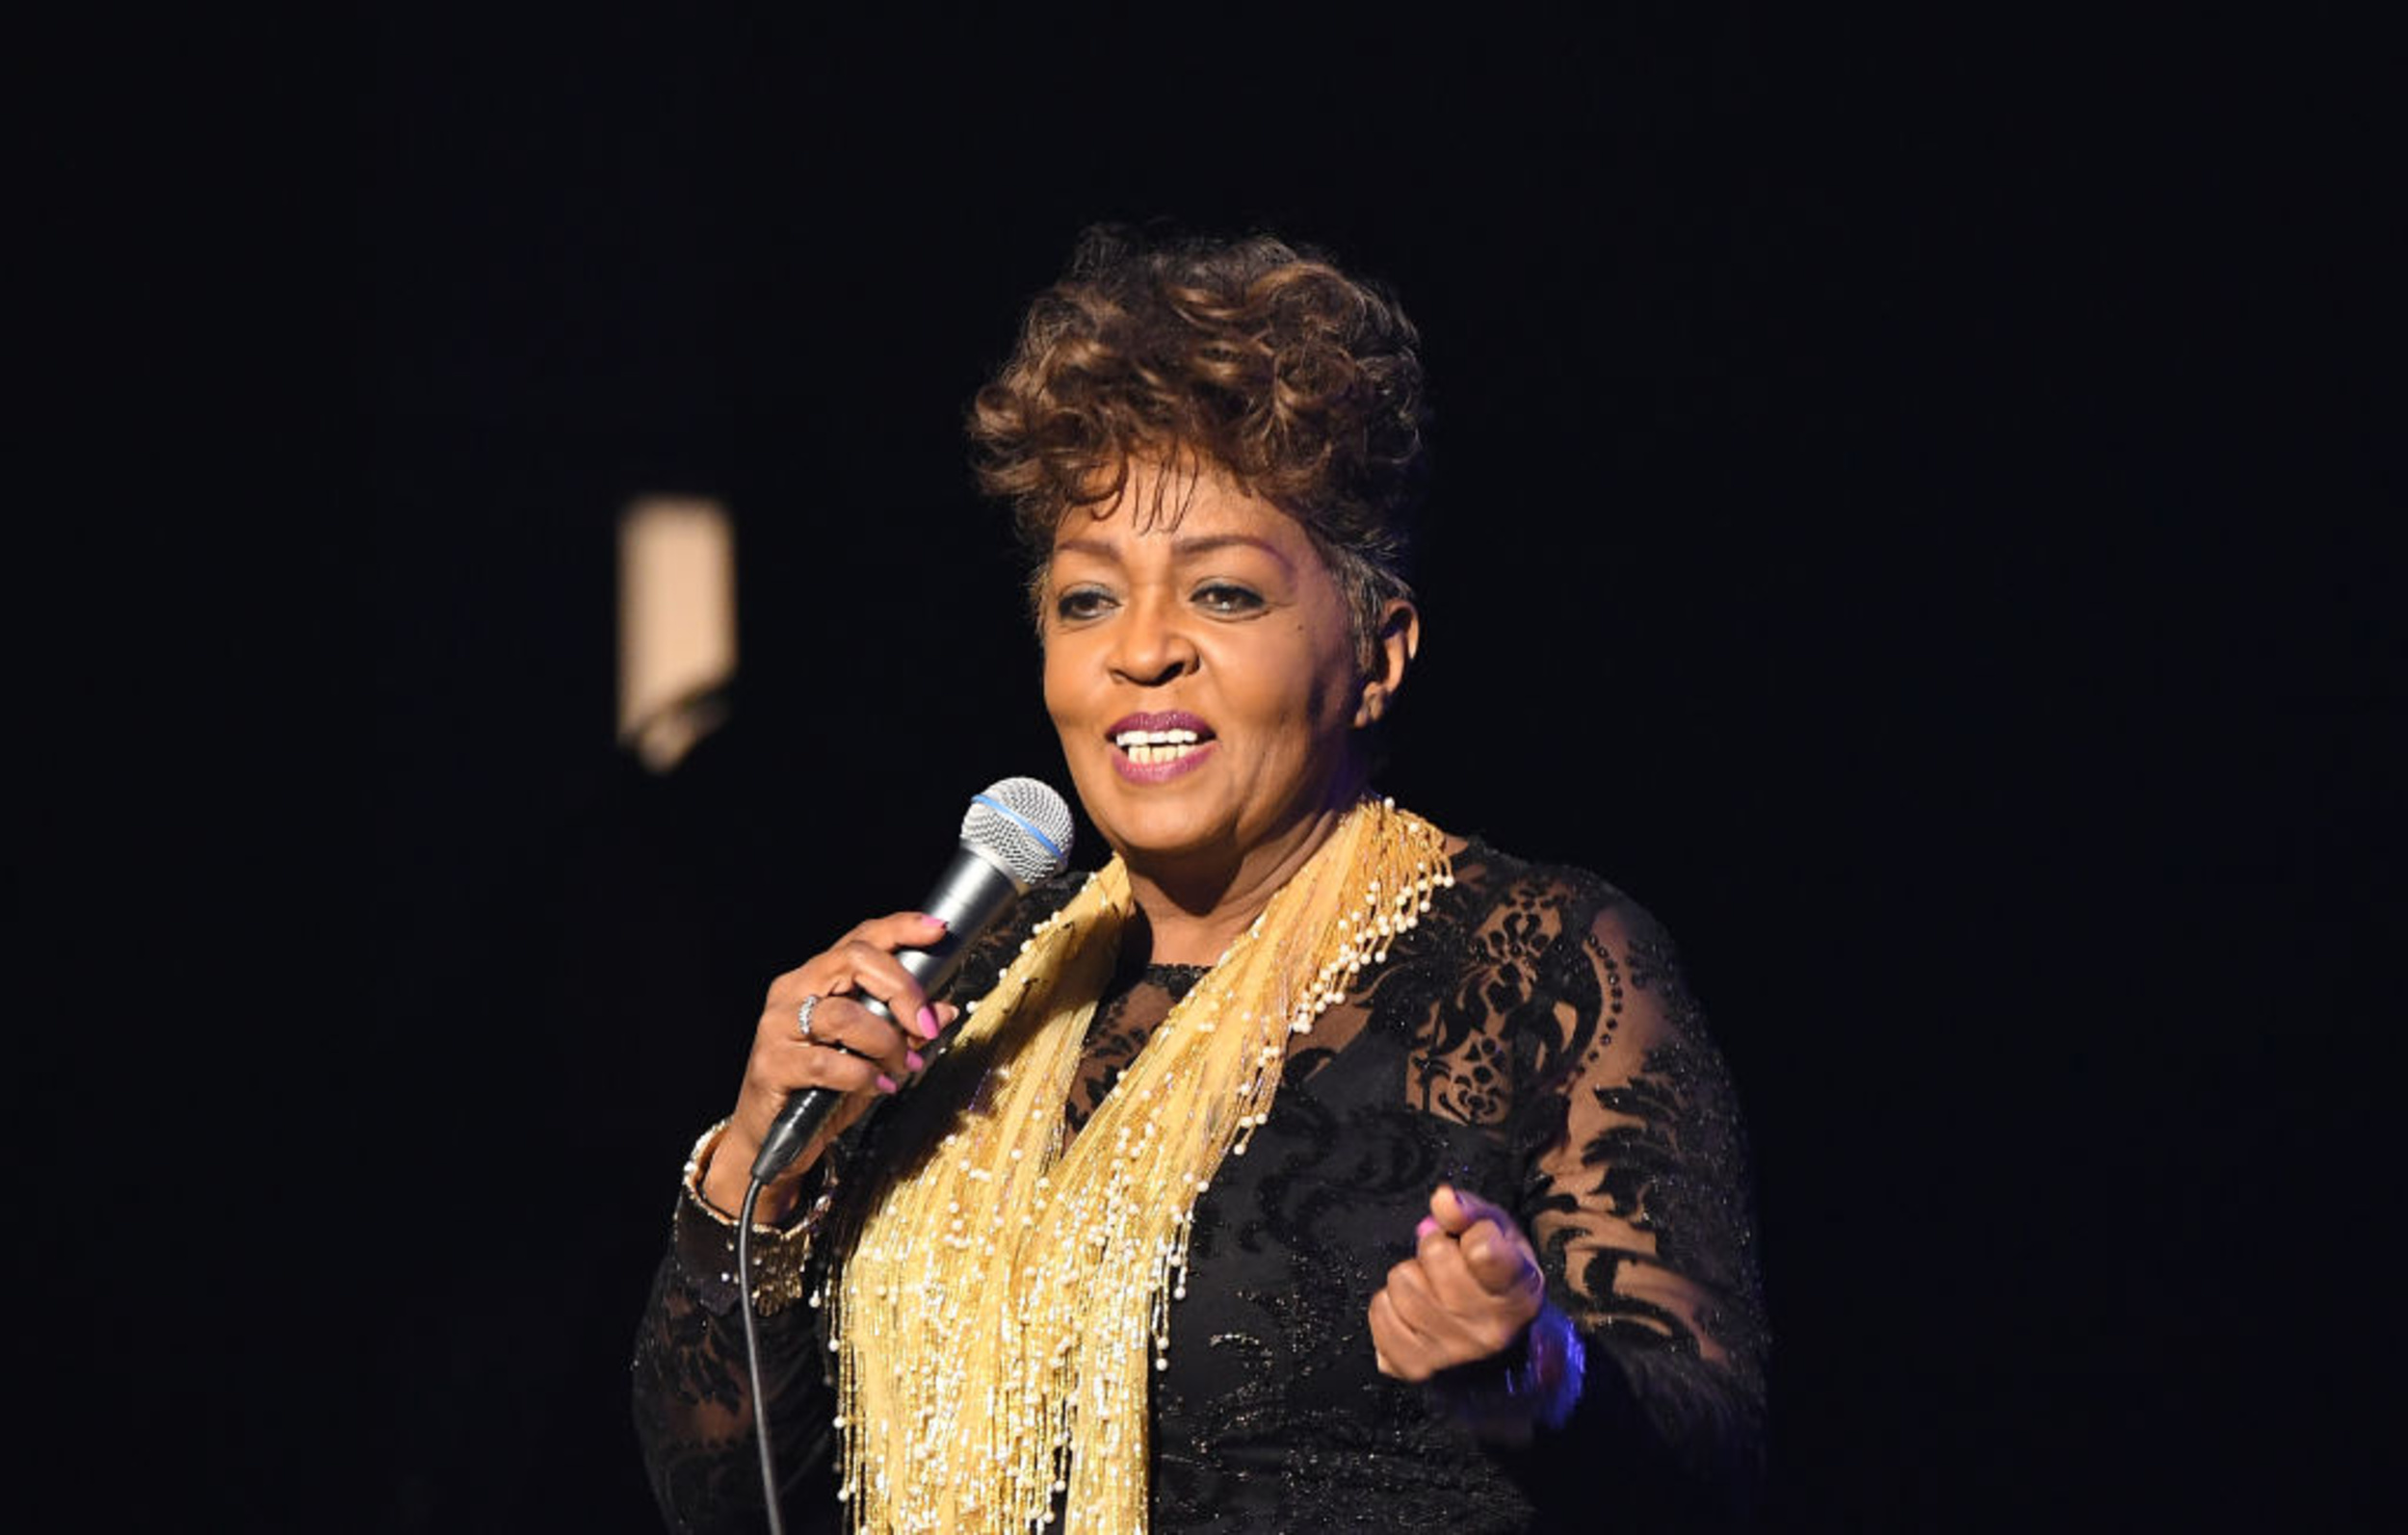 <p>In 1986, Anita Baker released her sophomore album <em>Rapture</em> which featured the hit single <a href="https://www.youtube.com/watch?v=Oz-b86LZ21c" rel="noopener noreferrer">“Caught Up in the Rapture.”</a> On the track, Baker details how sometimes people can feel an instant love connection. As she sings on the first verse, “When we met, I always knew / I would feel the magic for you / On my mind constantly / In my arms is where you should be.” </p><p>You may also like: <a href='https://www.yardbarker.com/entertainment/articles/the_20_most_scientifically_accurate_movies_120523/s1__39229835'>The 20 most scientifically accurate movies</a></p>